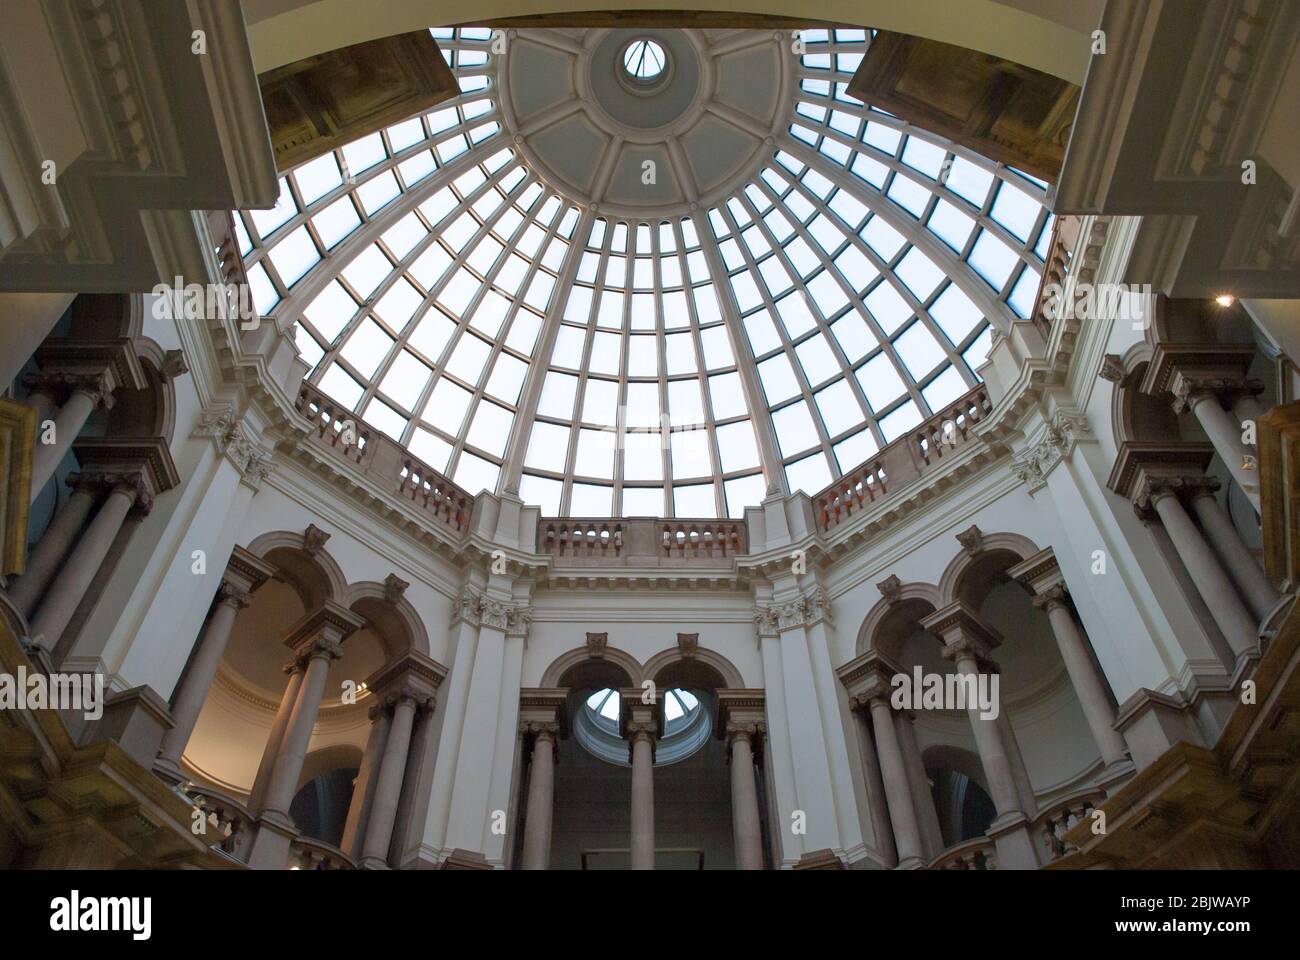 Tate Britain Interior Atrium Dome Skylight Glass Classical Architecture Columns Art Gallery Millbank, Westminster, London SW1P di Sidney Smith Foto Stock